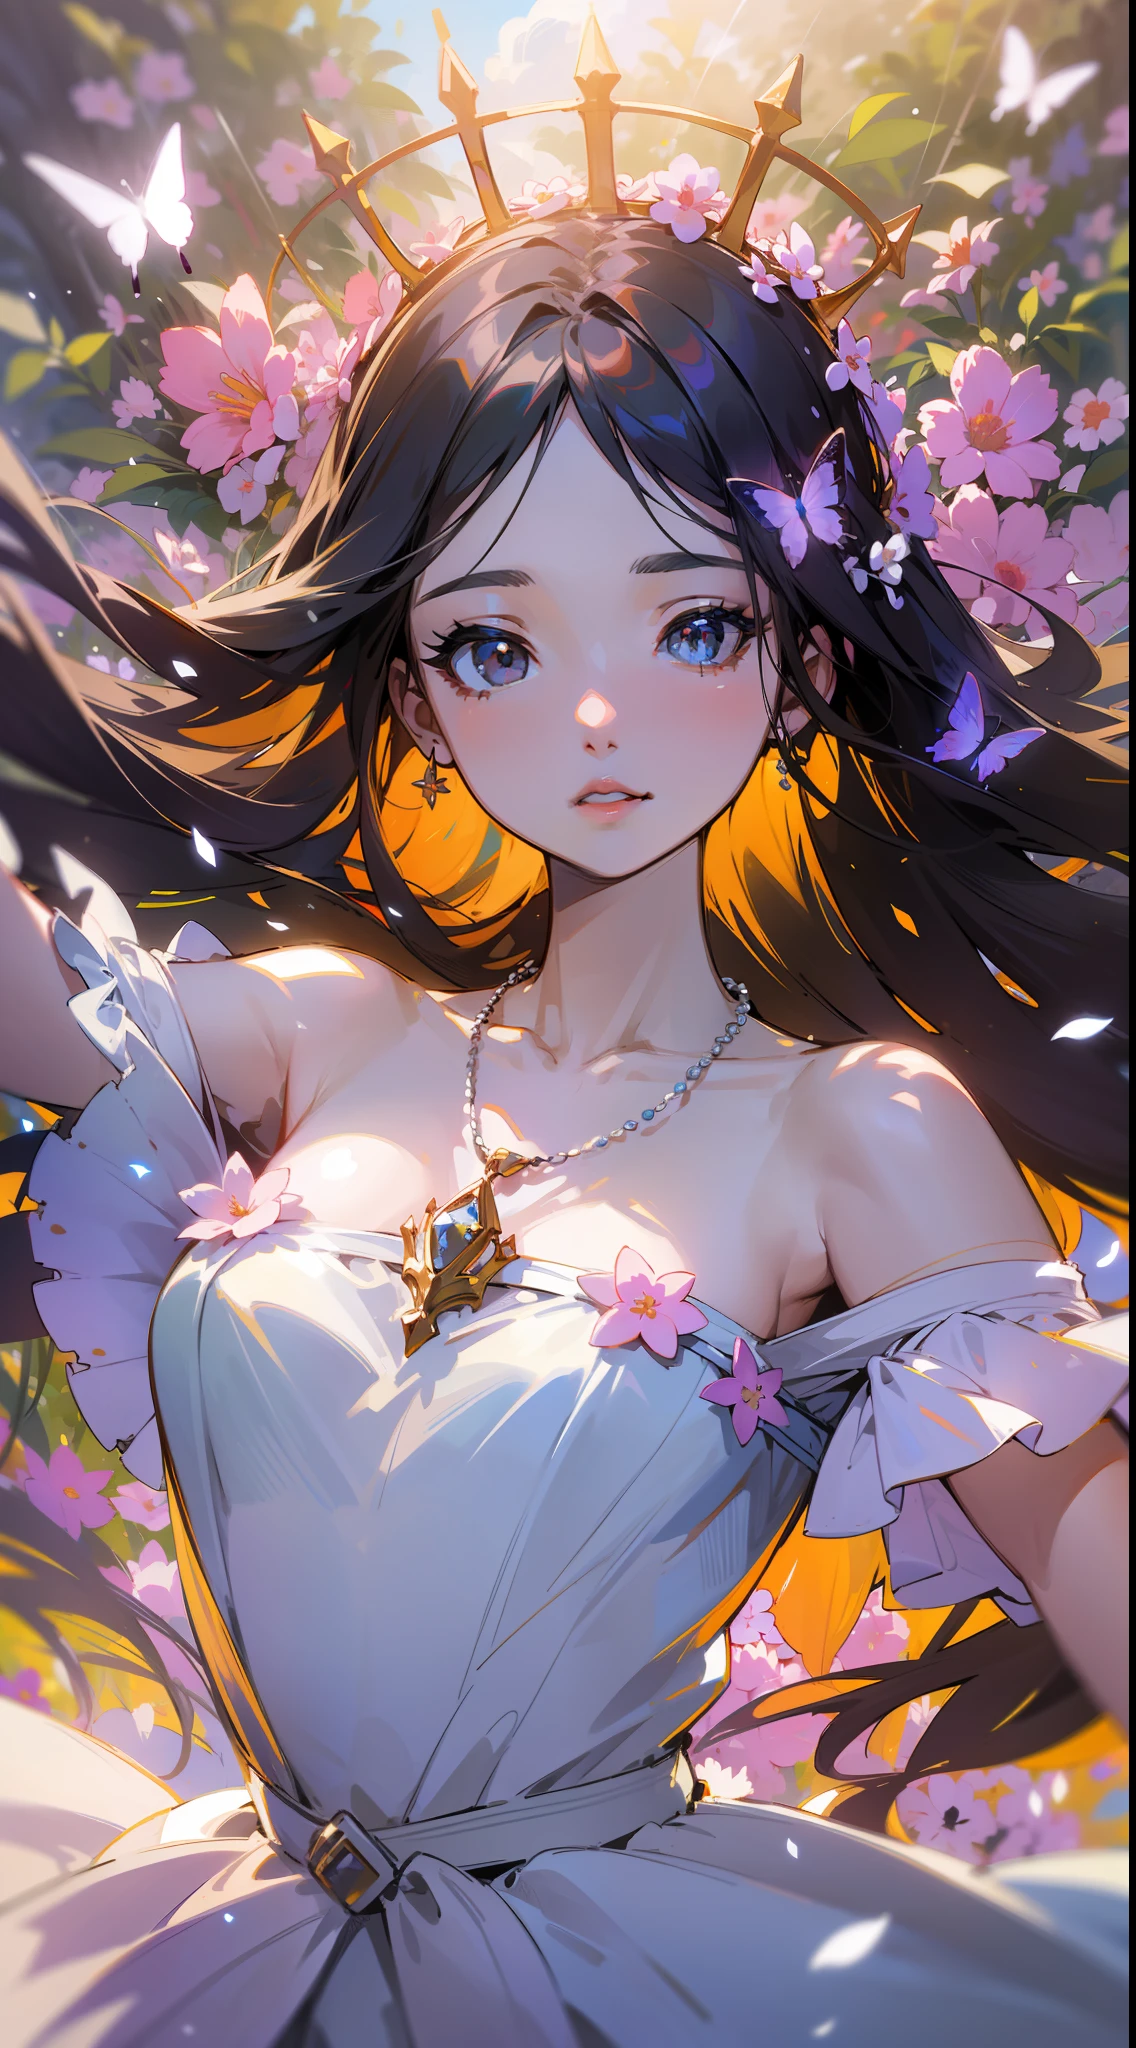 ((SFW)),Masterpiece, High Quality, ((Photoreal))), Cinematic Direction, (High Contrast), Depth of Field, (Award-winning Difference Photo), Face Details, Detailed Drawing, There is a place in the forest where flowers bloom, Girl dancing in a snow-white summer dress in that flower field, Girl is 11 years old, Very long hair with black hair, Summer sky, Summer clouds, Summer dazzling sunlight, Flower garden, Girl with open arms, necklace, crown of flowers, butterfly, fluttering petals, dynamic movement, dance,